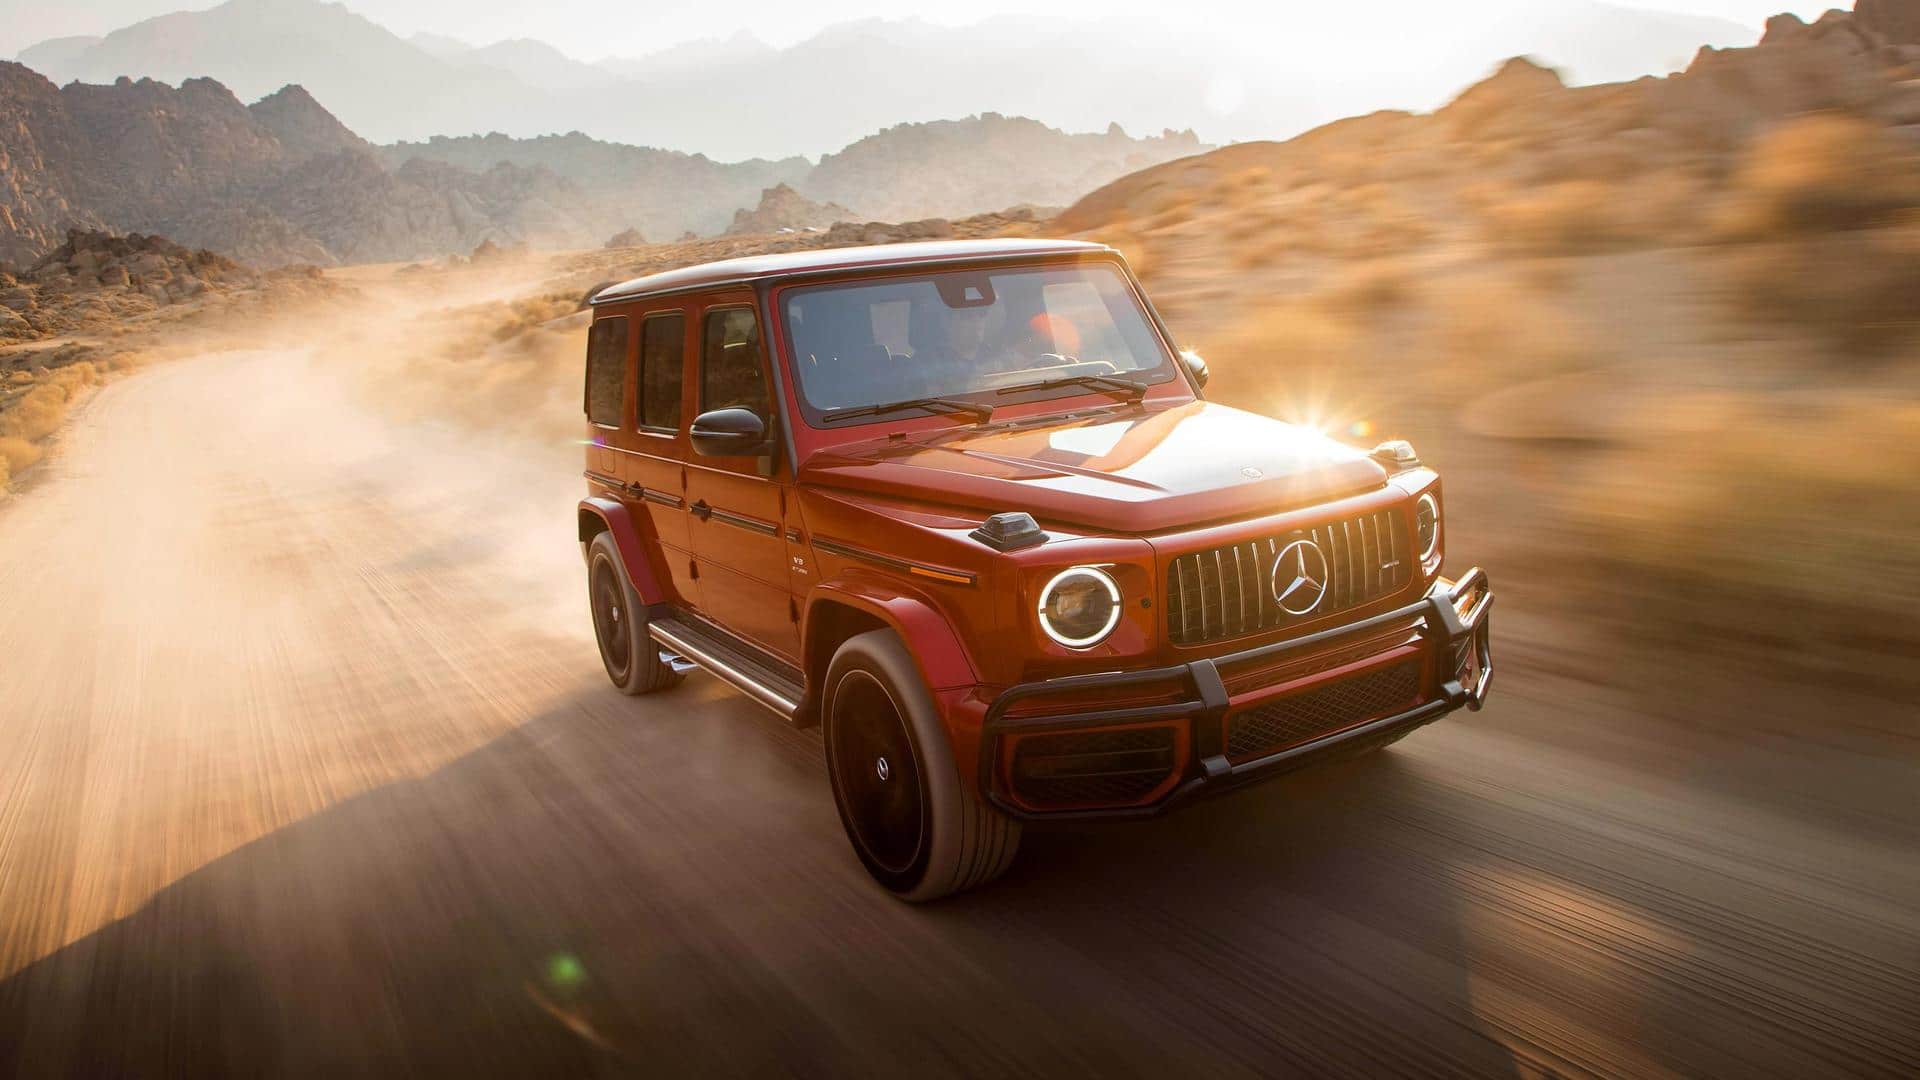 Mercedes-AMG G 63 receives one of the biggest price-hikes ever